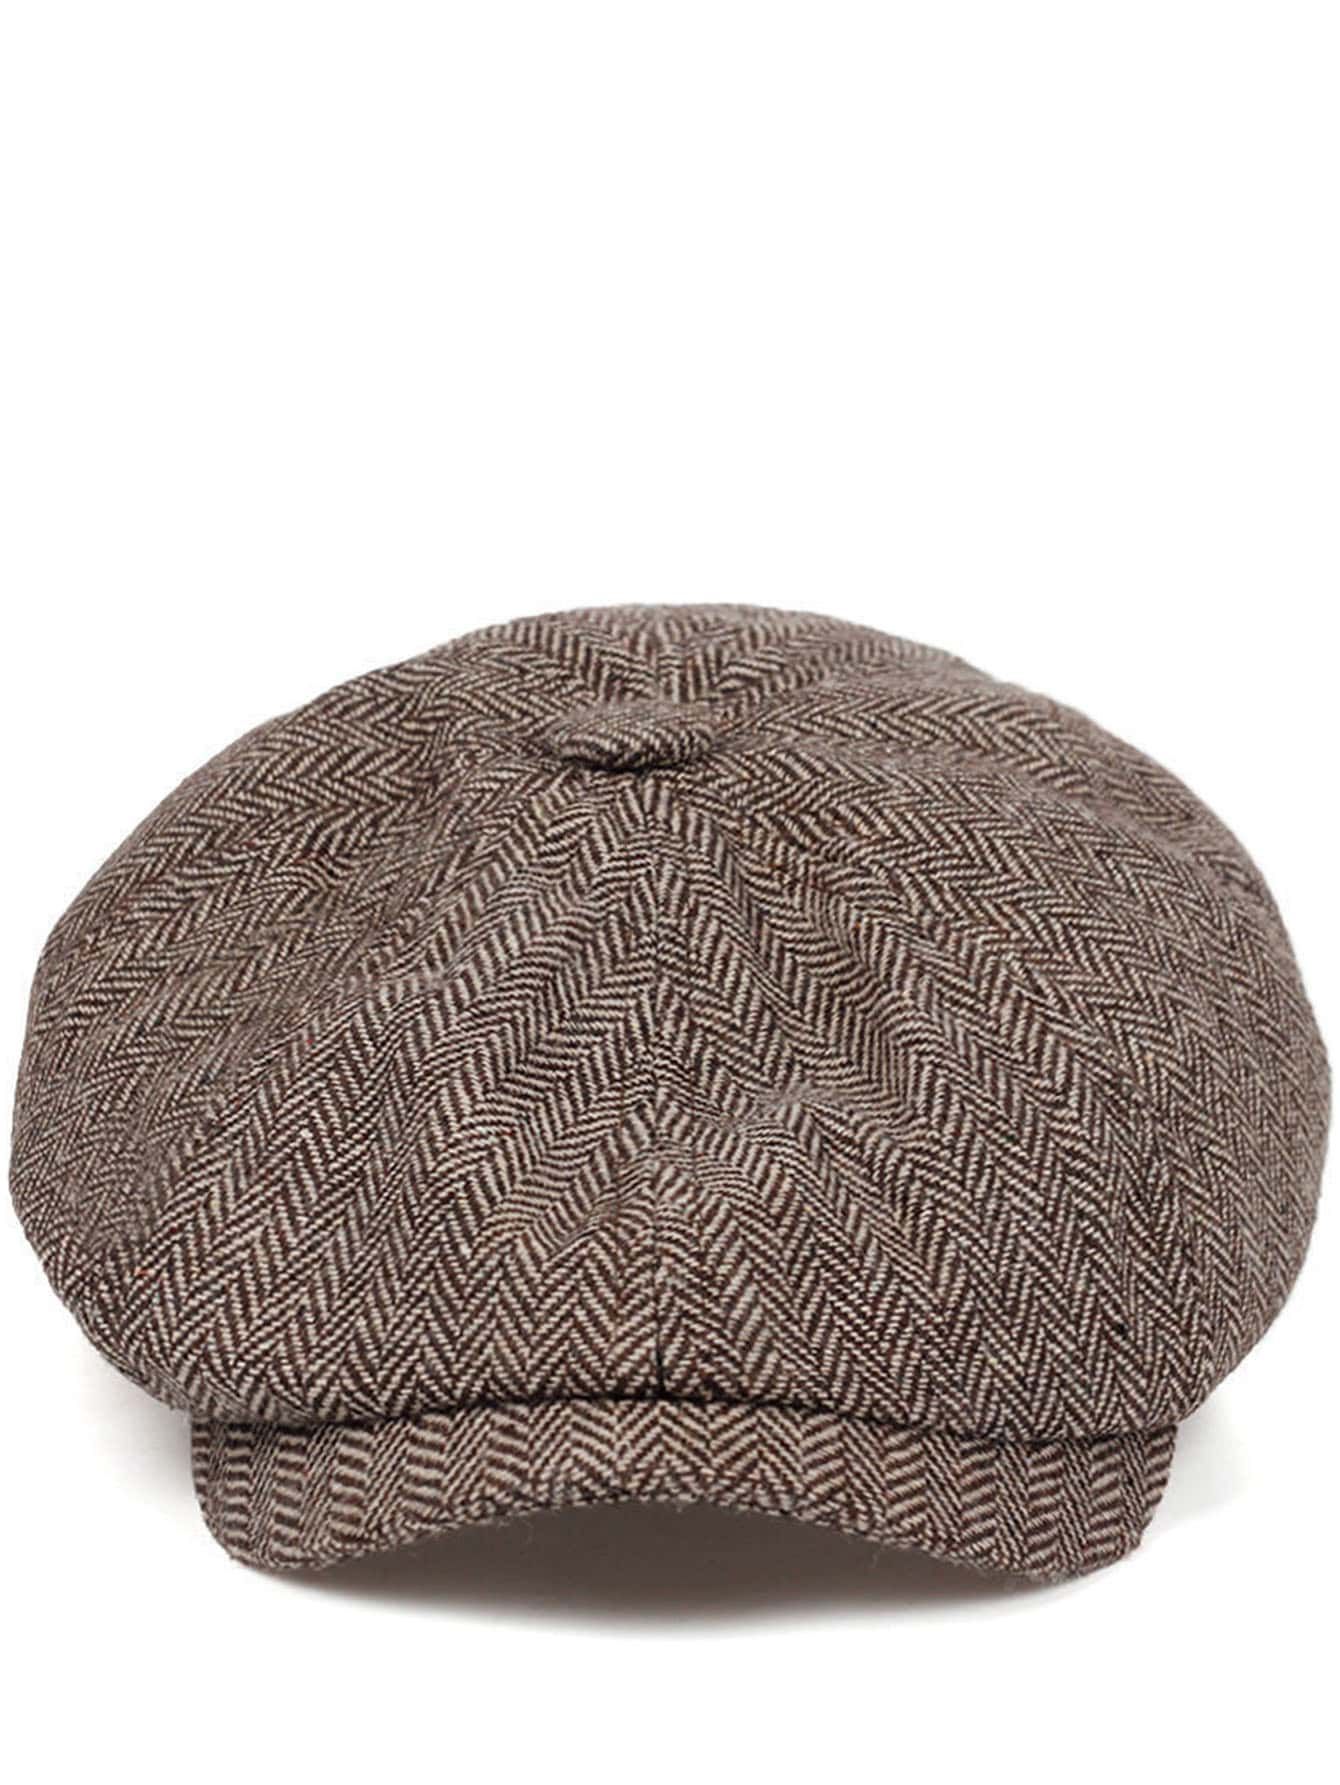 1pc Chocolate Brown Vintage Newsboy Cap With Big Brim For Men, Autumn/winter Style, Large Size | SHEIN